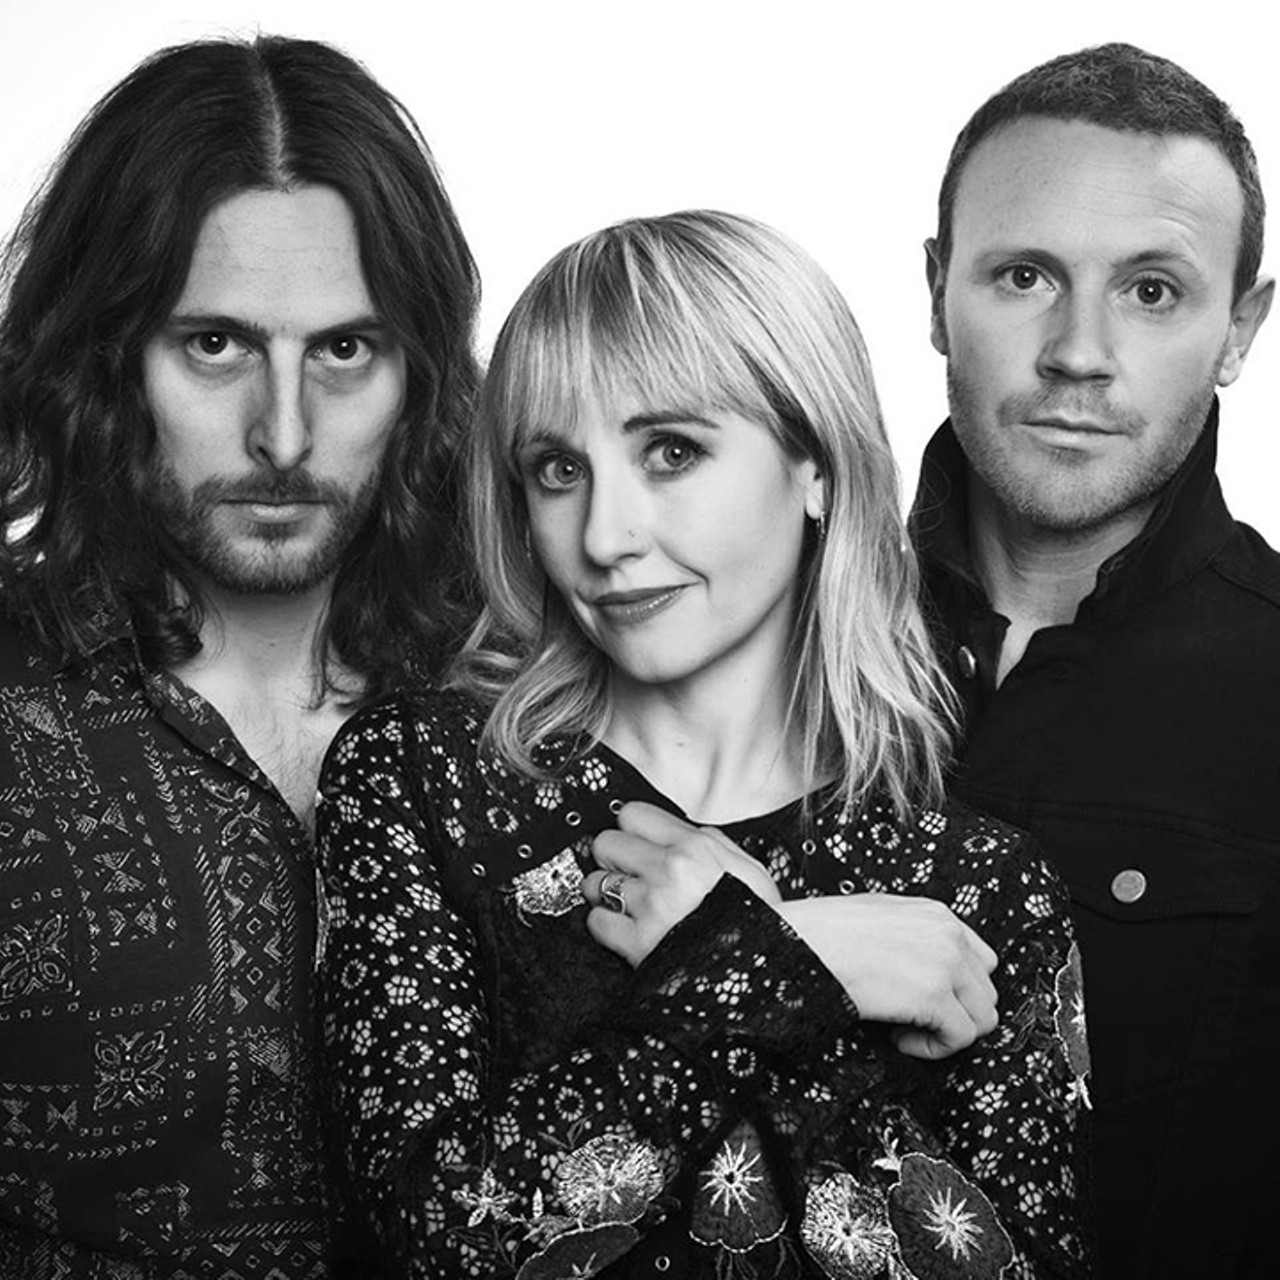 Wednesday, May 8The Joy Formidable at the Social